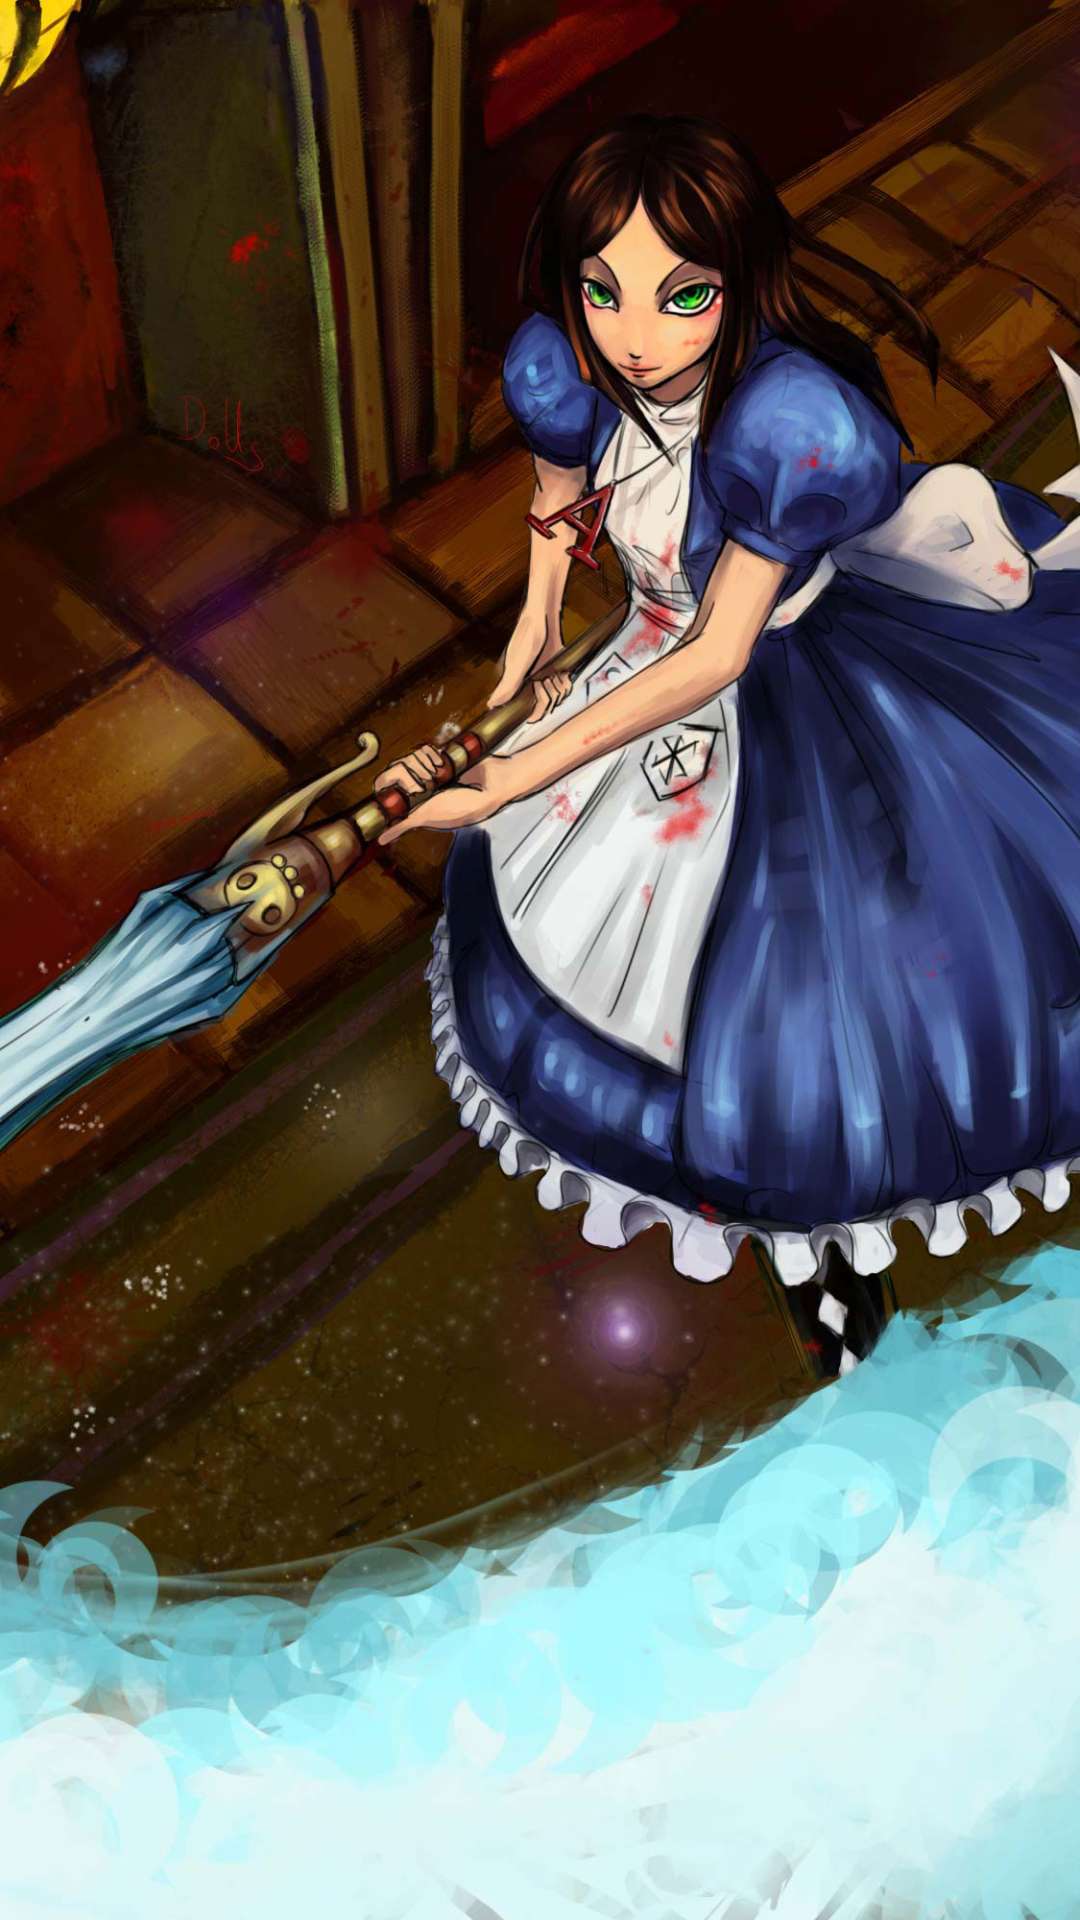 video game, american mcgee's alice wallpaper for mobile